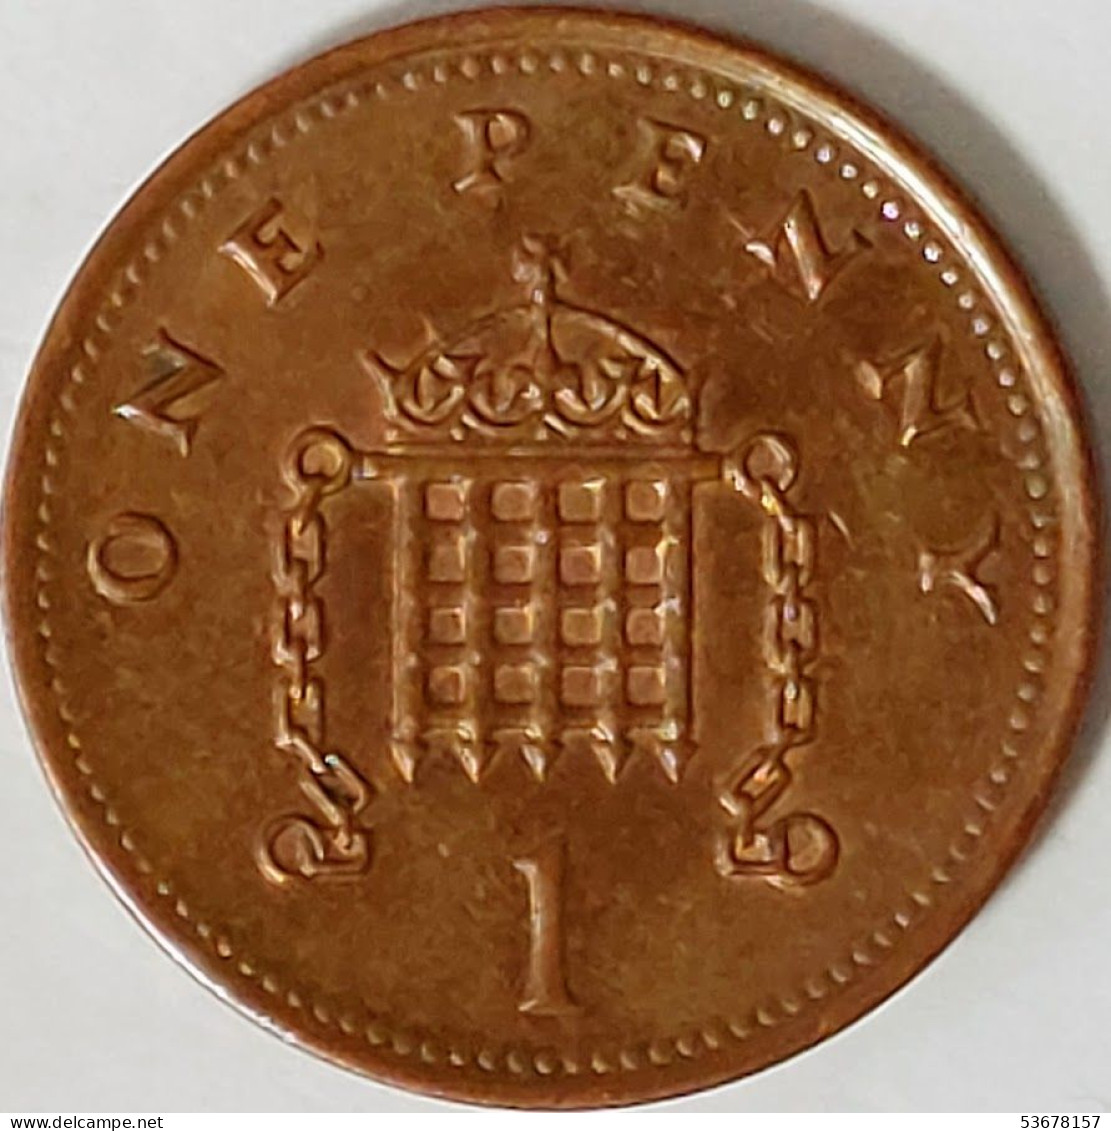 Great Britain - Penny 1993, KM# 935a (#2305) - 1 Penny & 1 New Penny